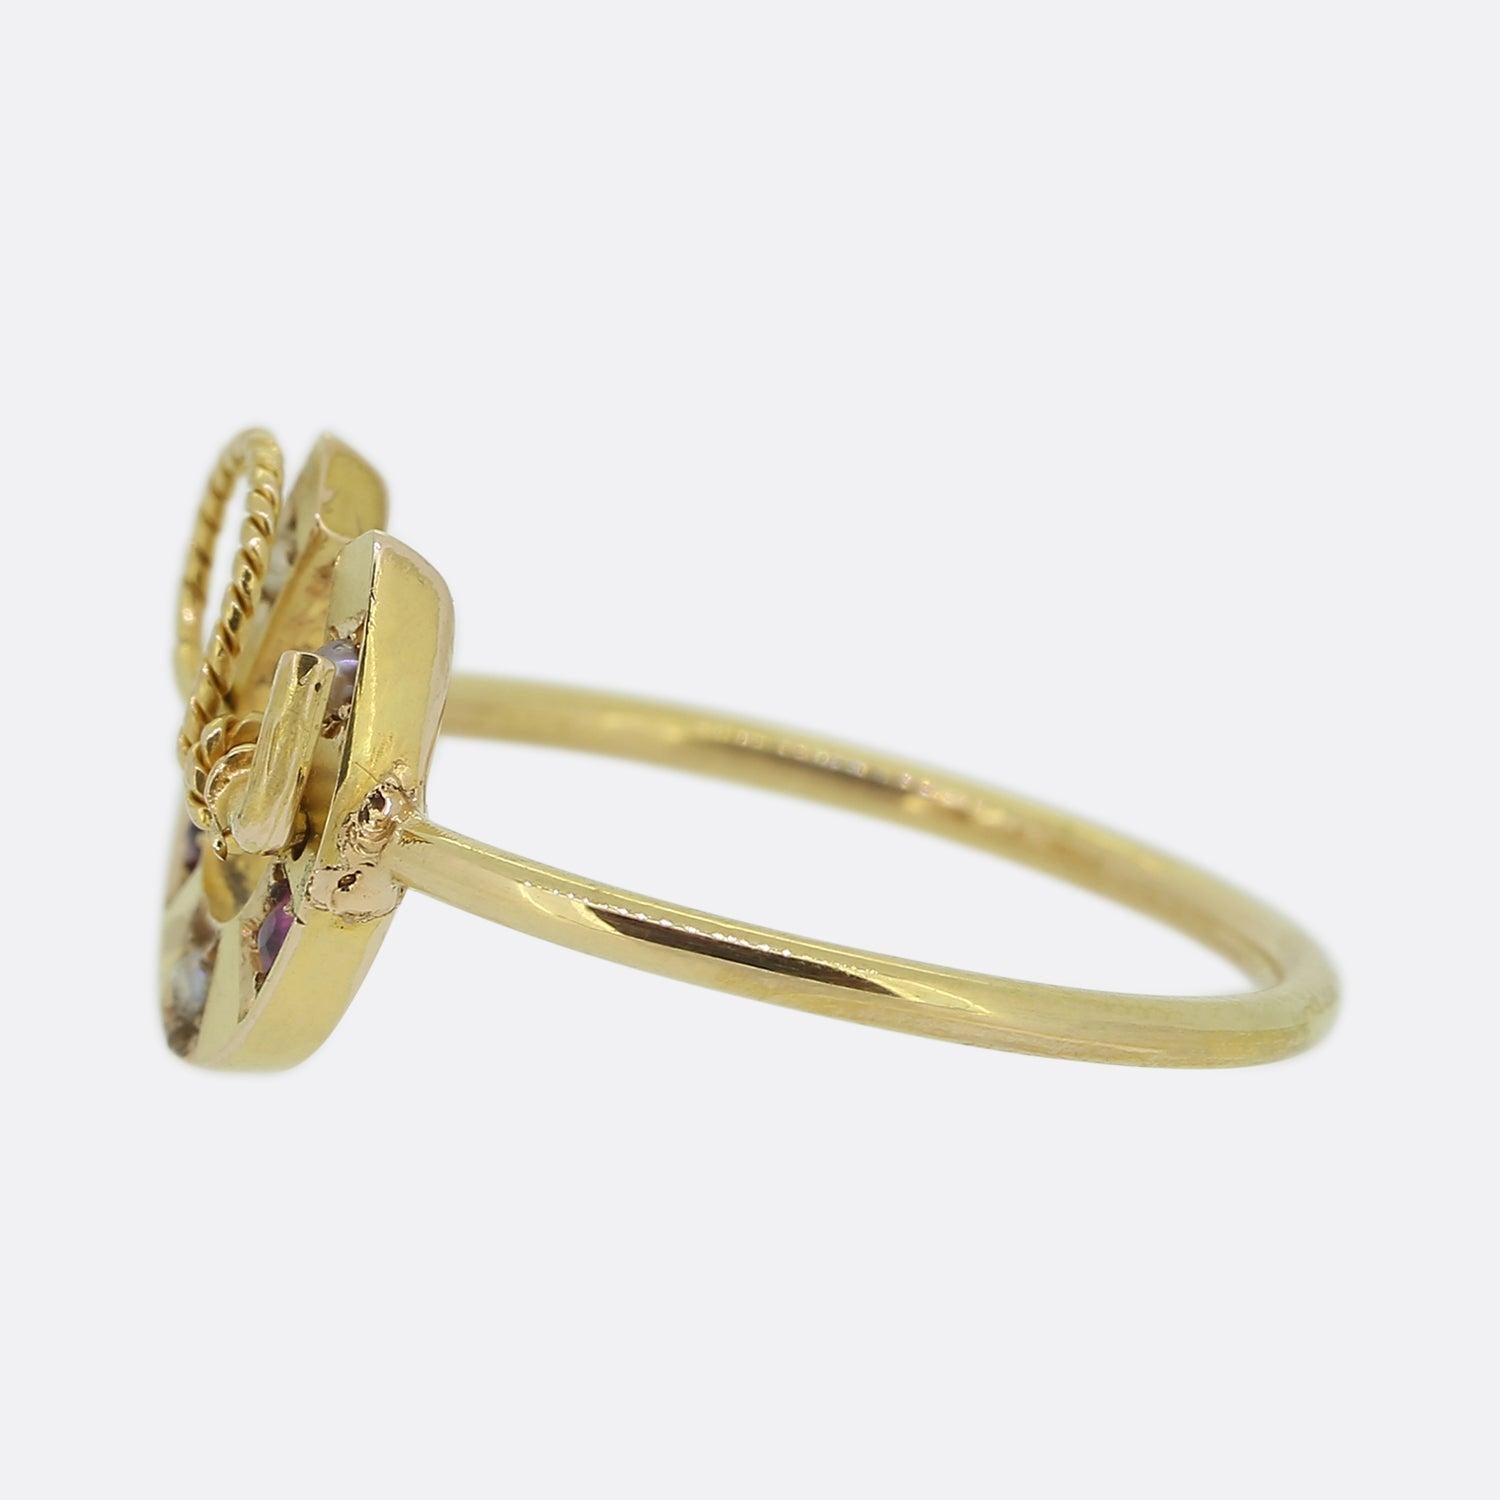 Here we have a 15ct yellow gold ring that originally dates back to the Victorian era. Th head of this piece has been crafted into the shape of a horseshoe and riding crop with neatly set pink sapphires and white seed pearls individually nestled